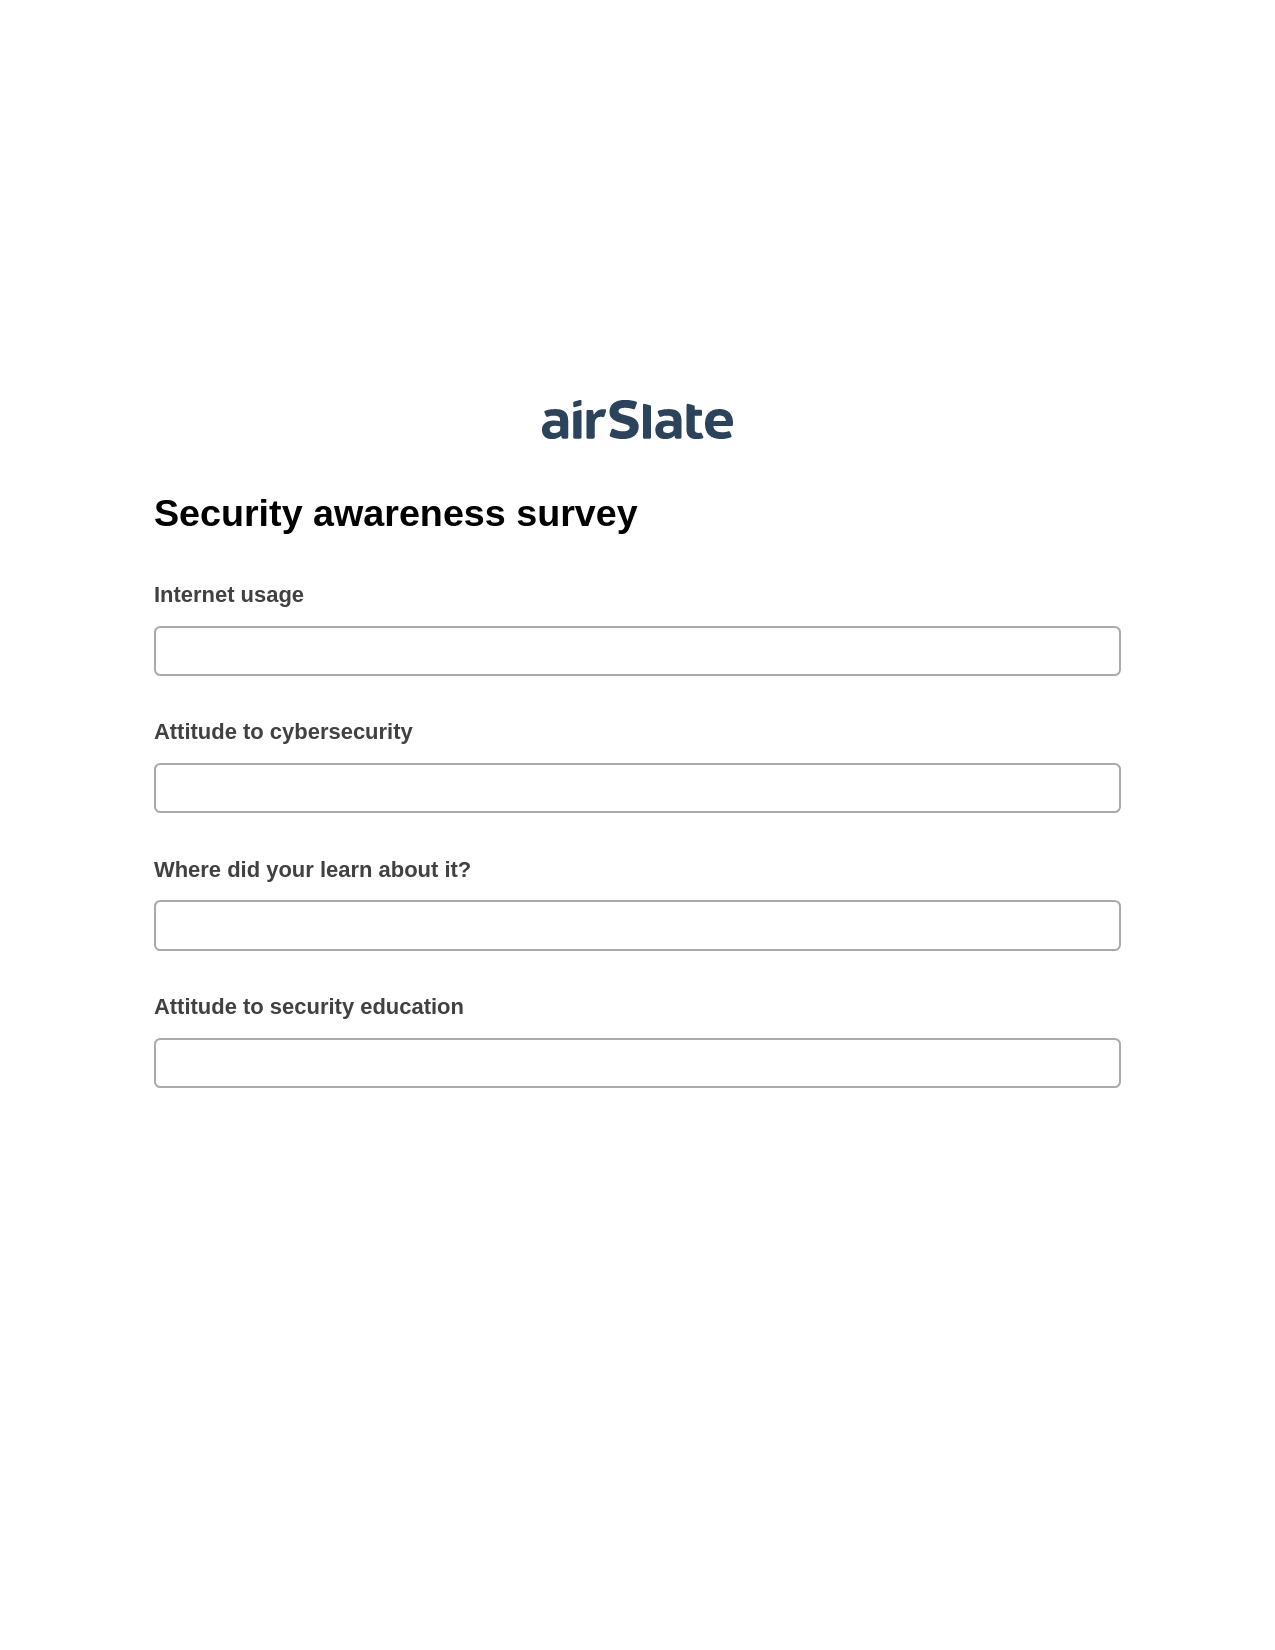 Multirole Security awareness survey Pre-fill from CSV File Bot, Remove Slate Bot, Archive to SharePoint Folder Bot